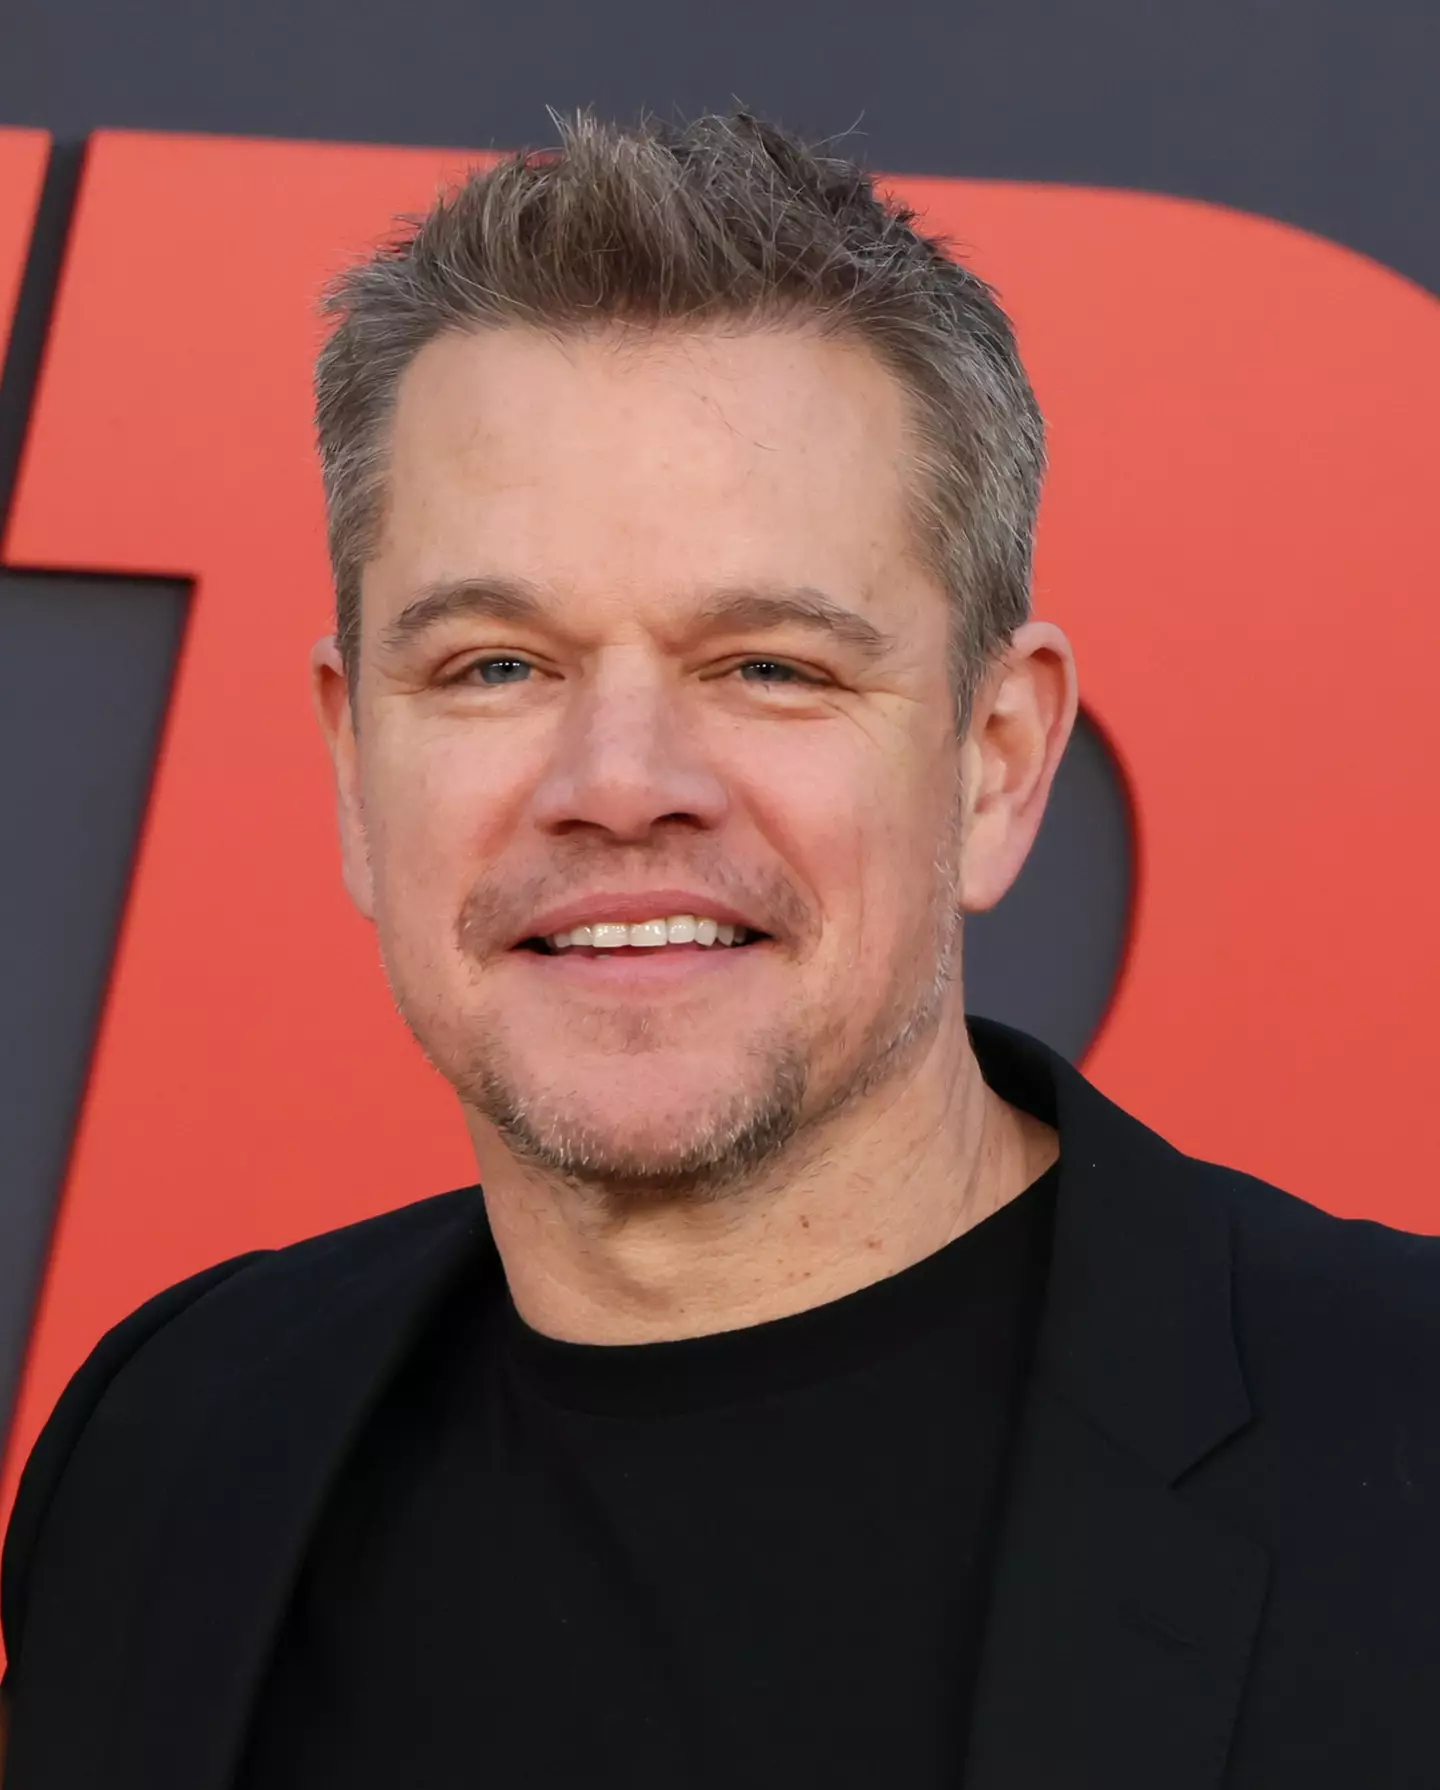 Matt Damon says he 'fell into depression' while shooting one movie.